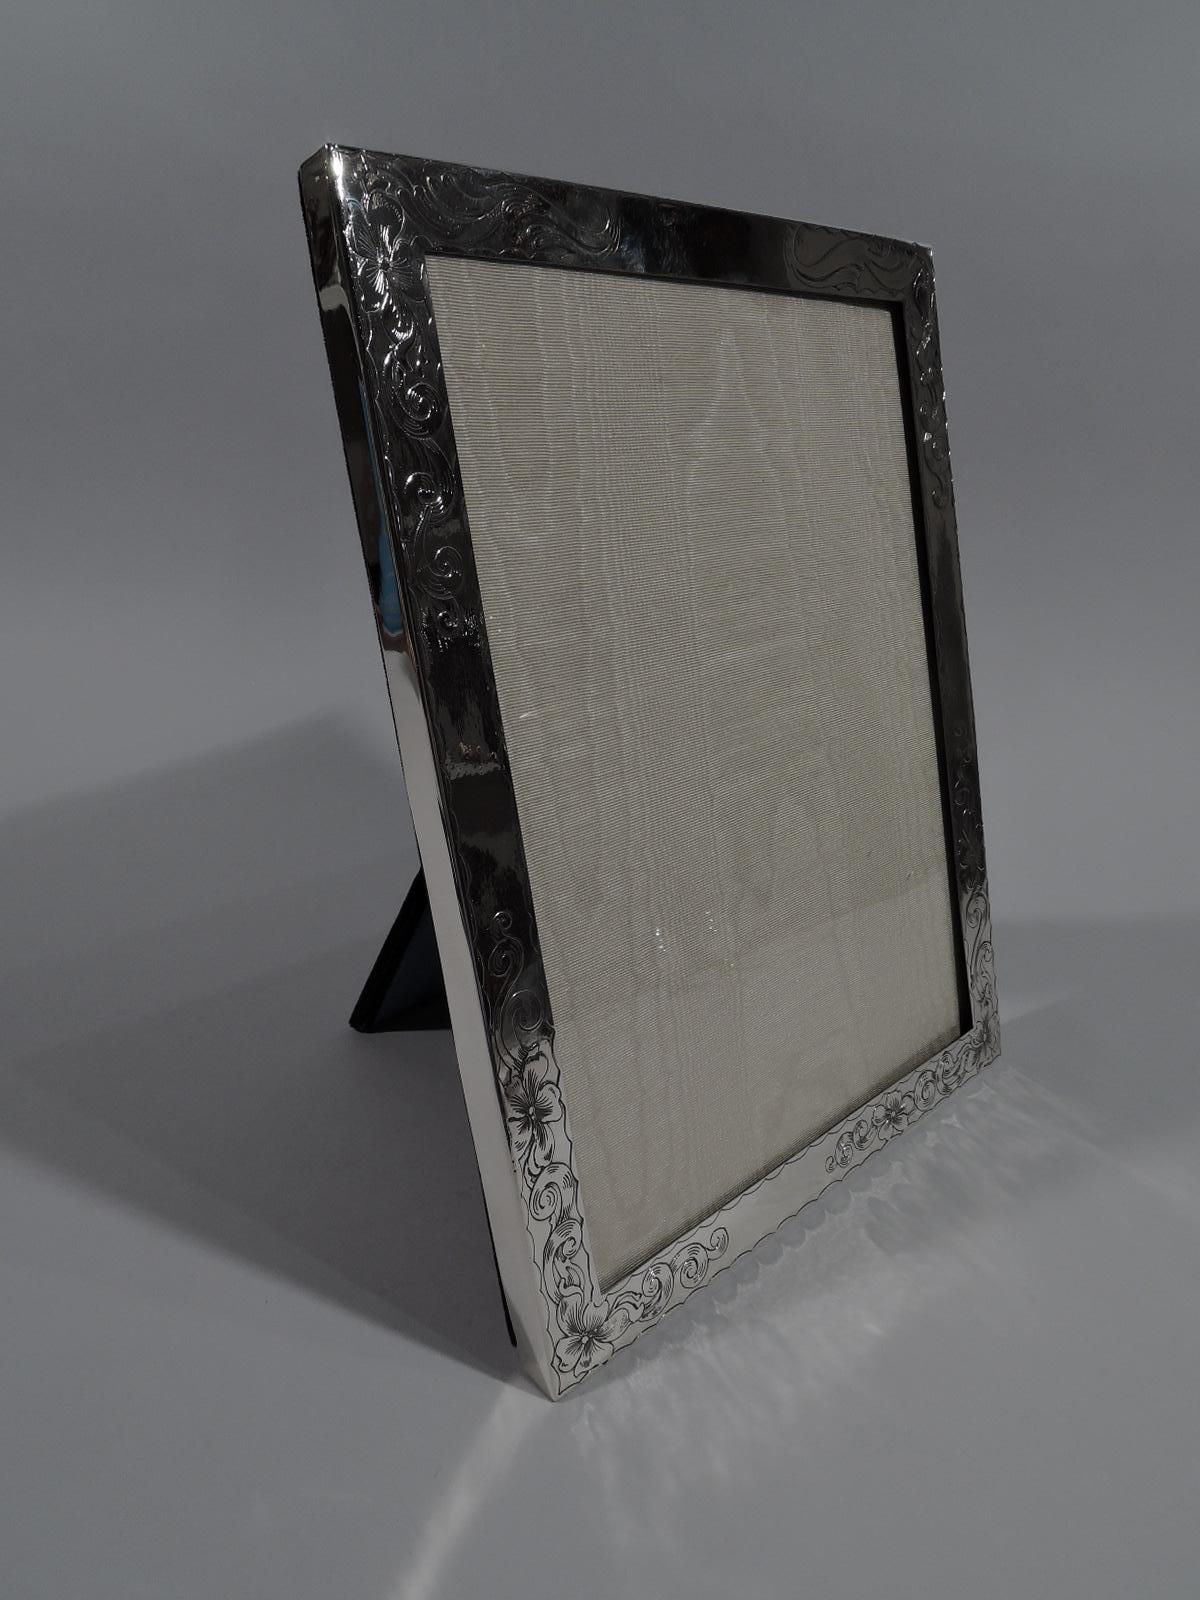 20th Century American Art Nouveau Sterling Silver Picture Frame